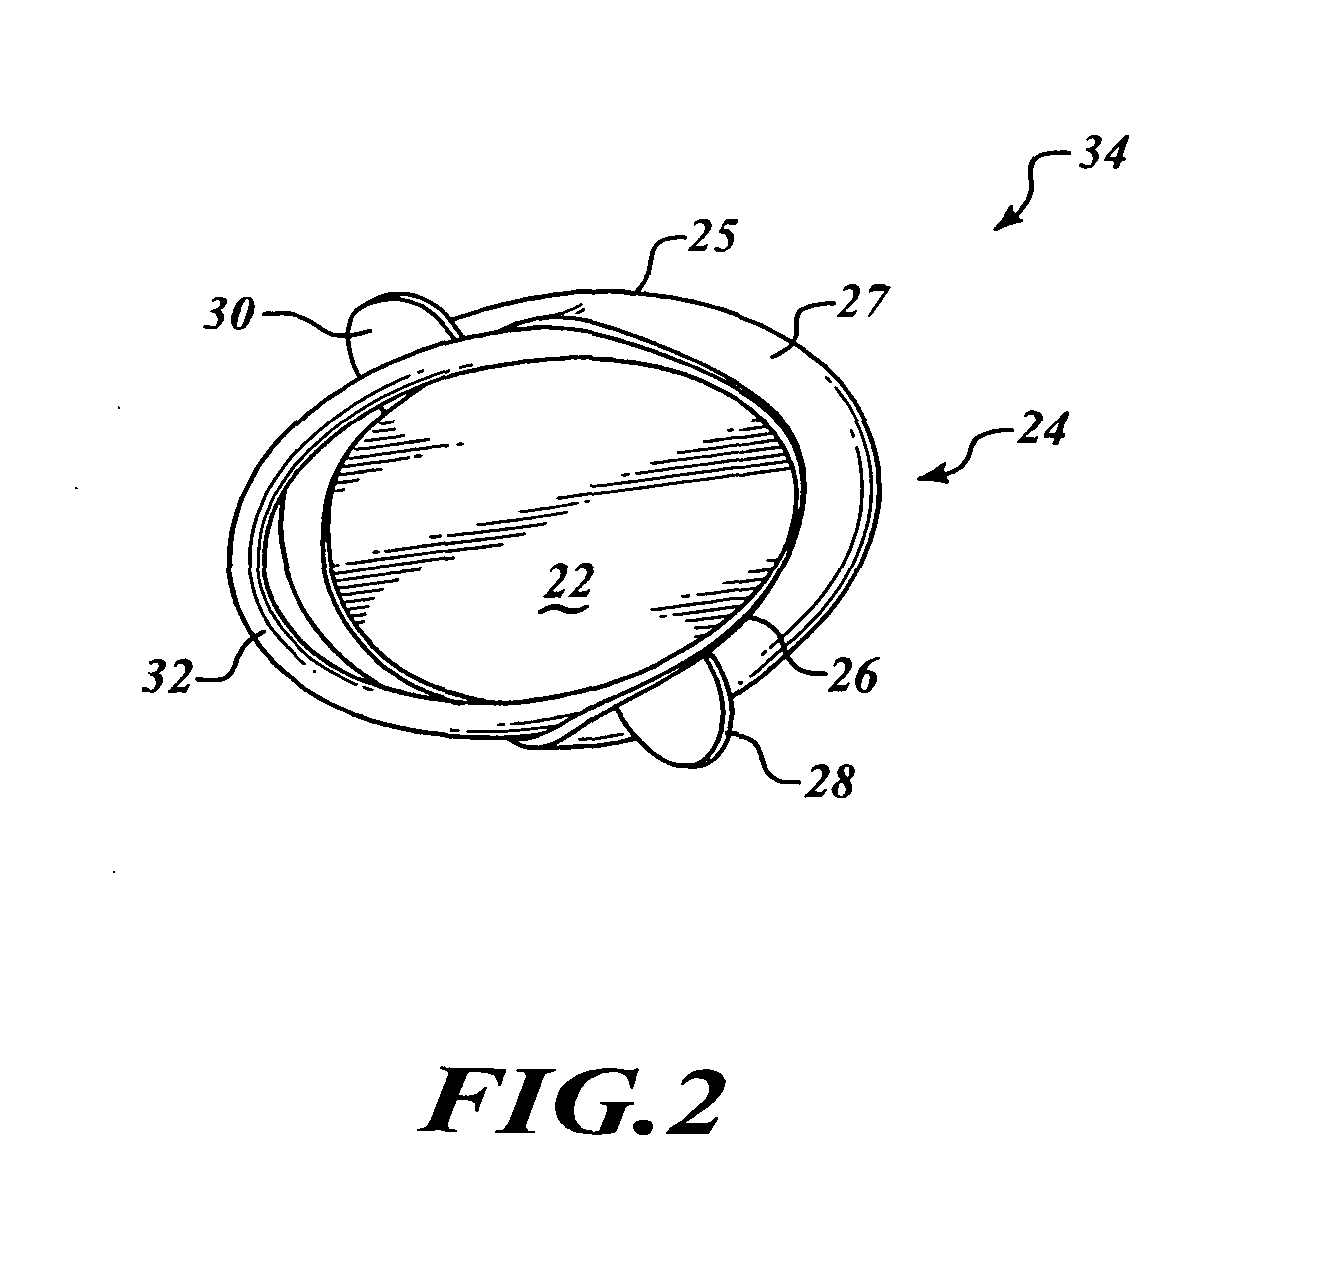 Disposable stethoscope glove and method